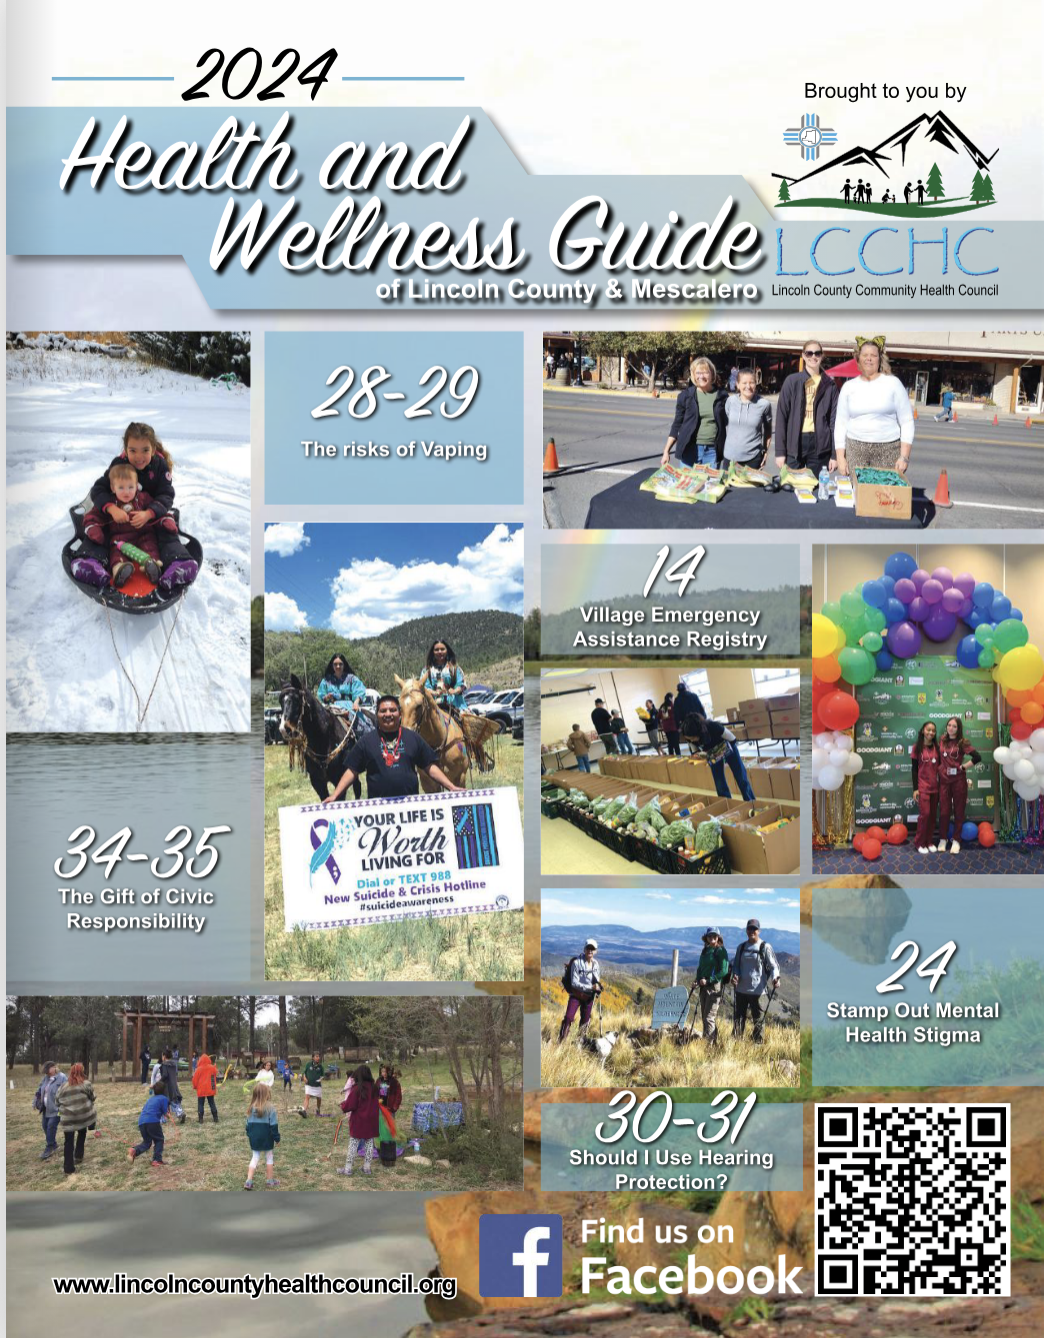 Health and Wellness Guide of Lincoln County and Mescalero